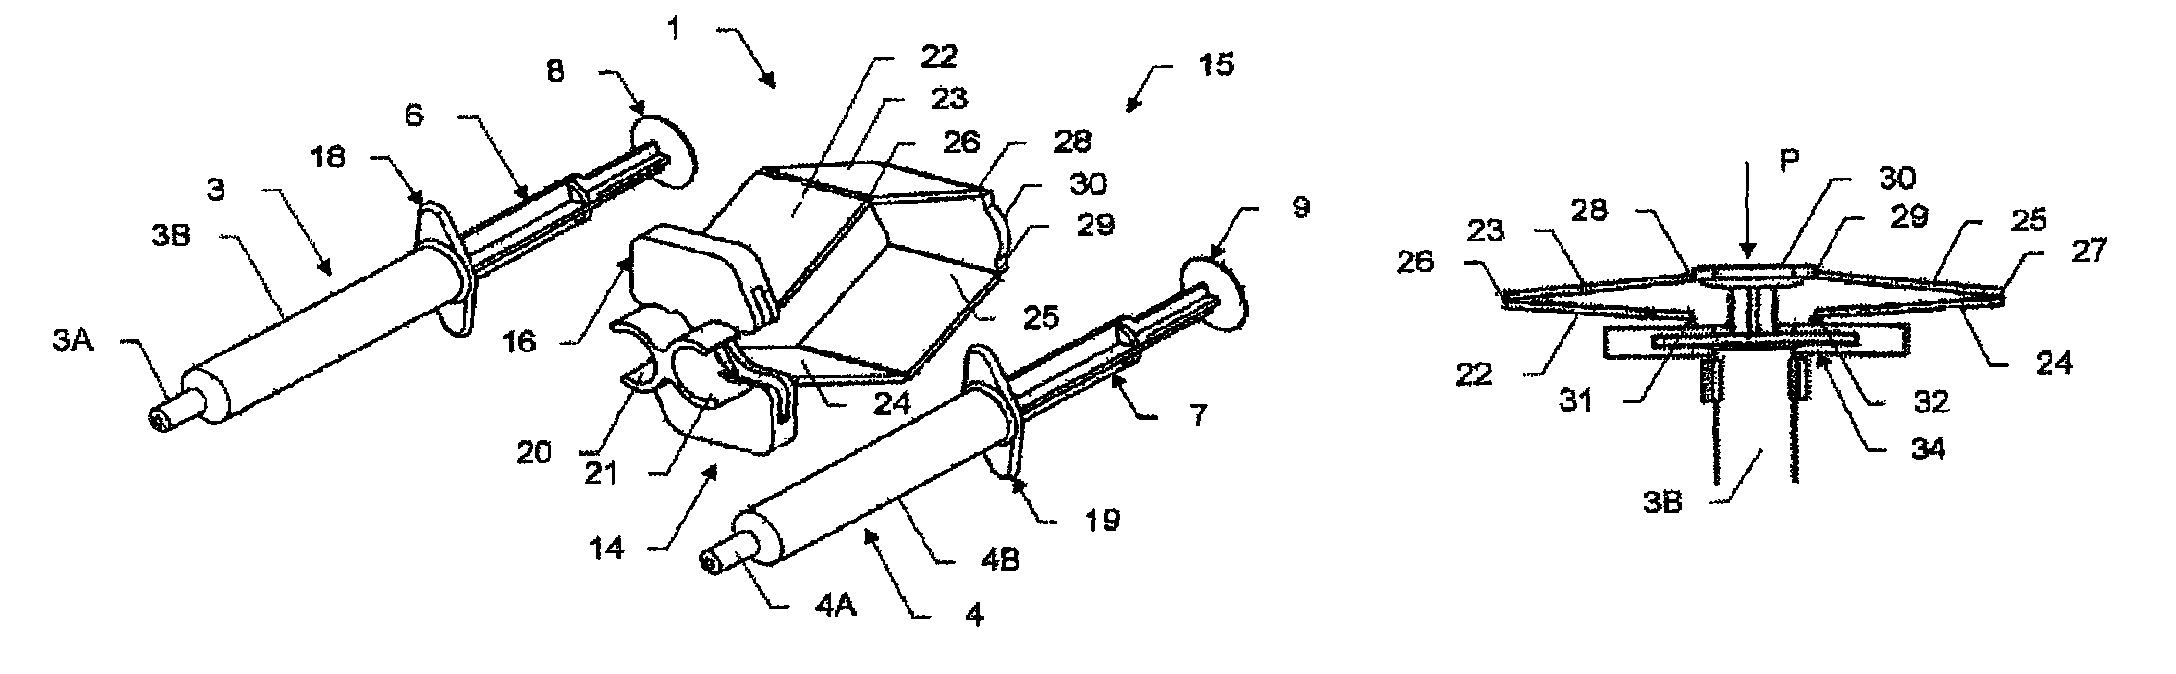 Dispensing assembly with separate syringes and syringe holder